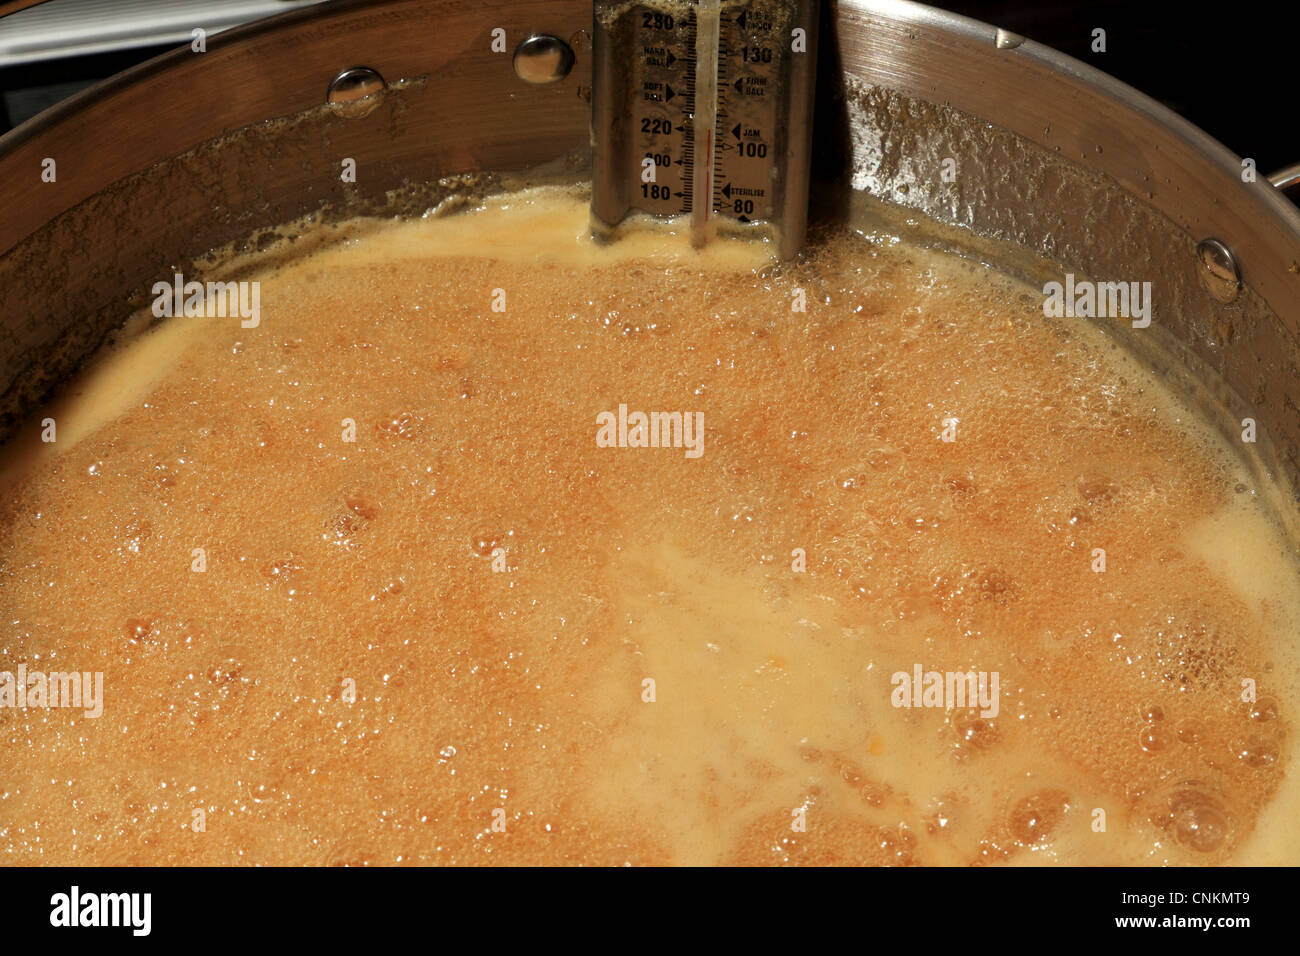 3736. Marmalade making, rolling boil at 106c Stock Photo - Alamy